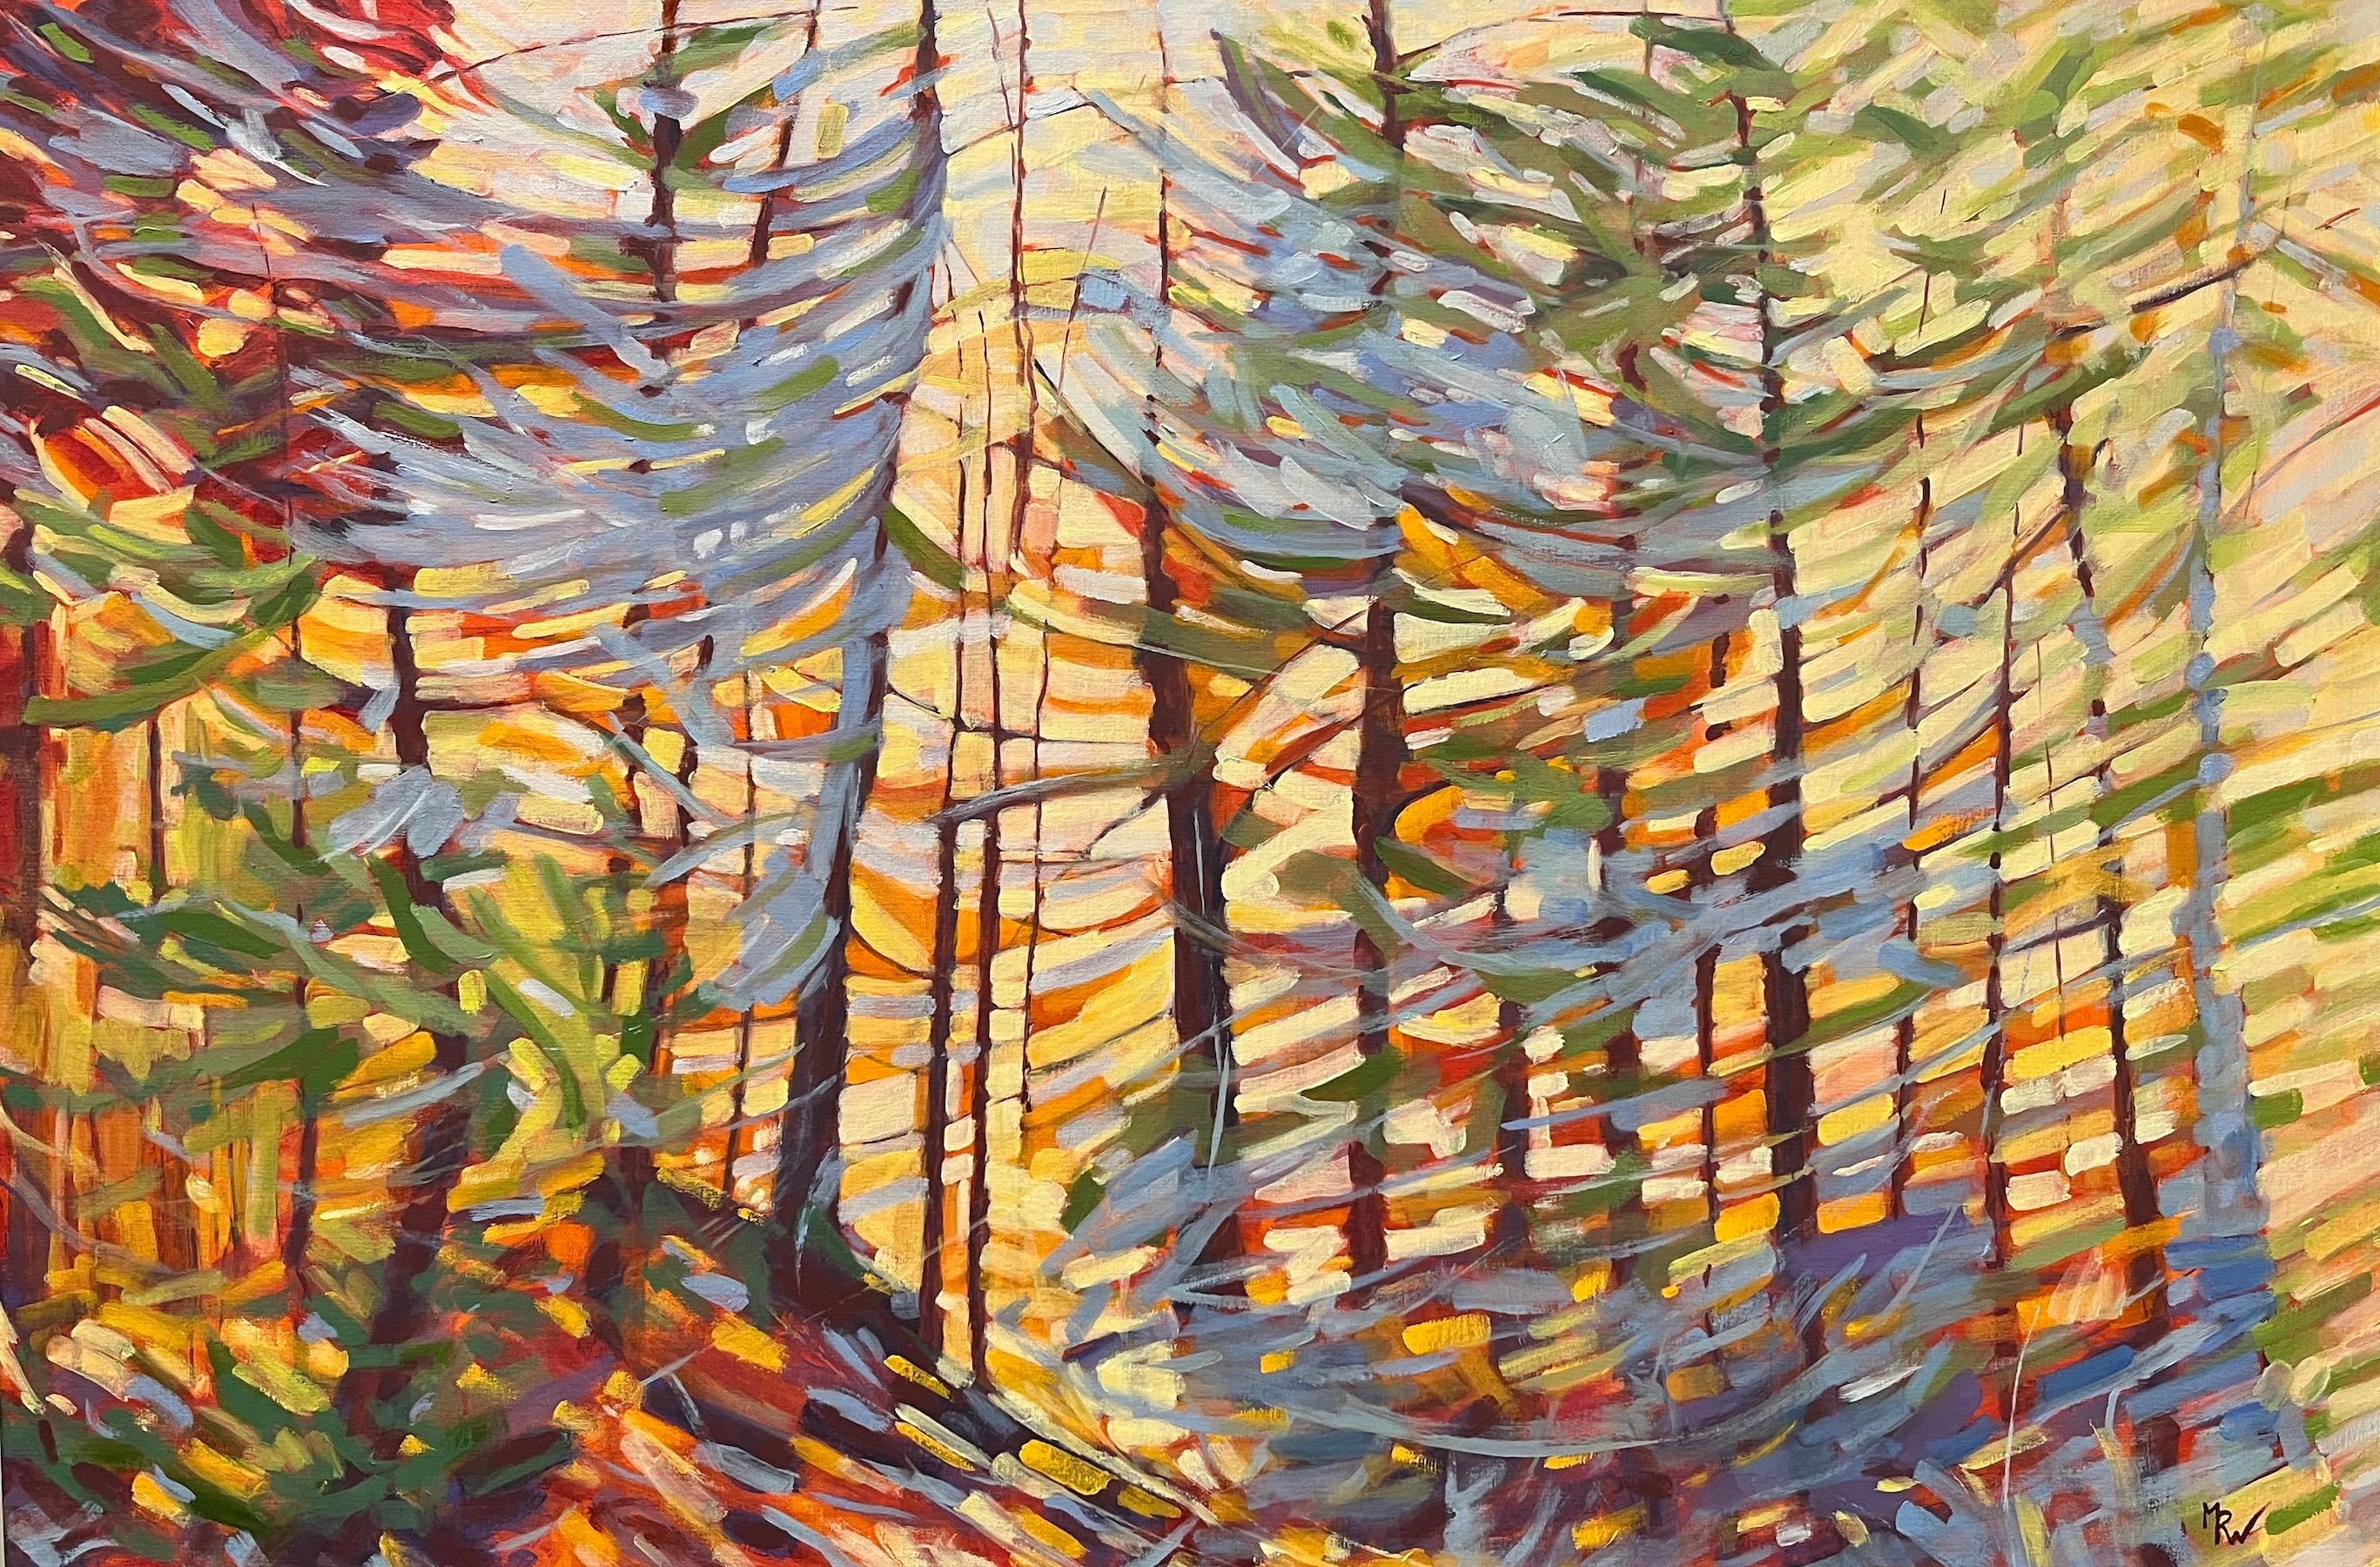 Marcia Wise Landscape Painting - "Spiritoso", contemporary, landscape, yellow, orange, red, green, oil painting